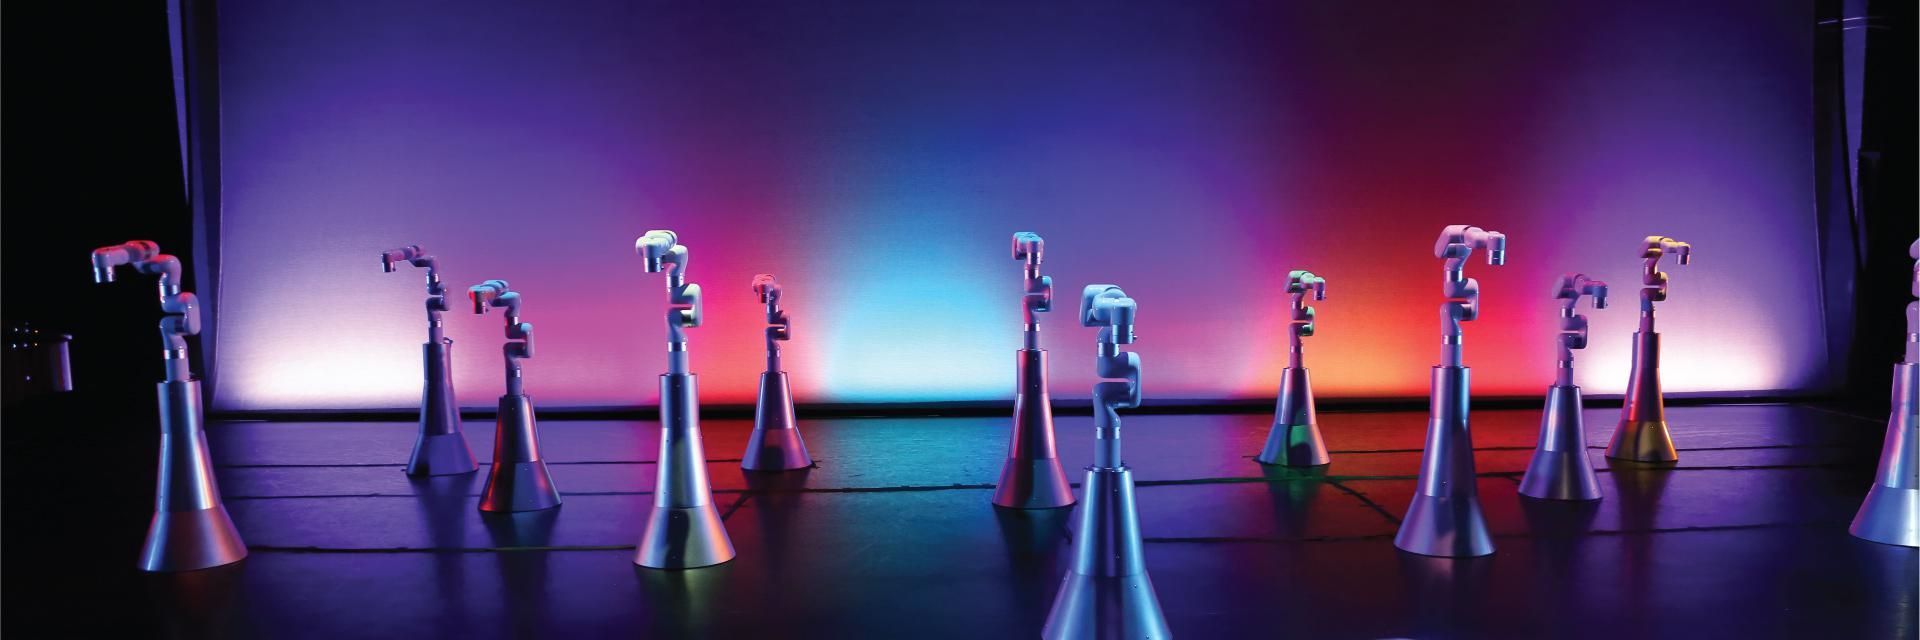 Ten colorfully lit robot arms on metal pedestals spread out across a dance stage